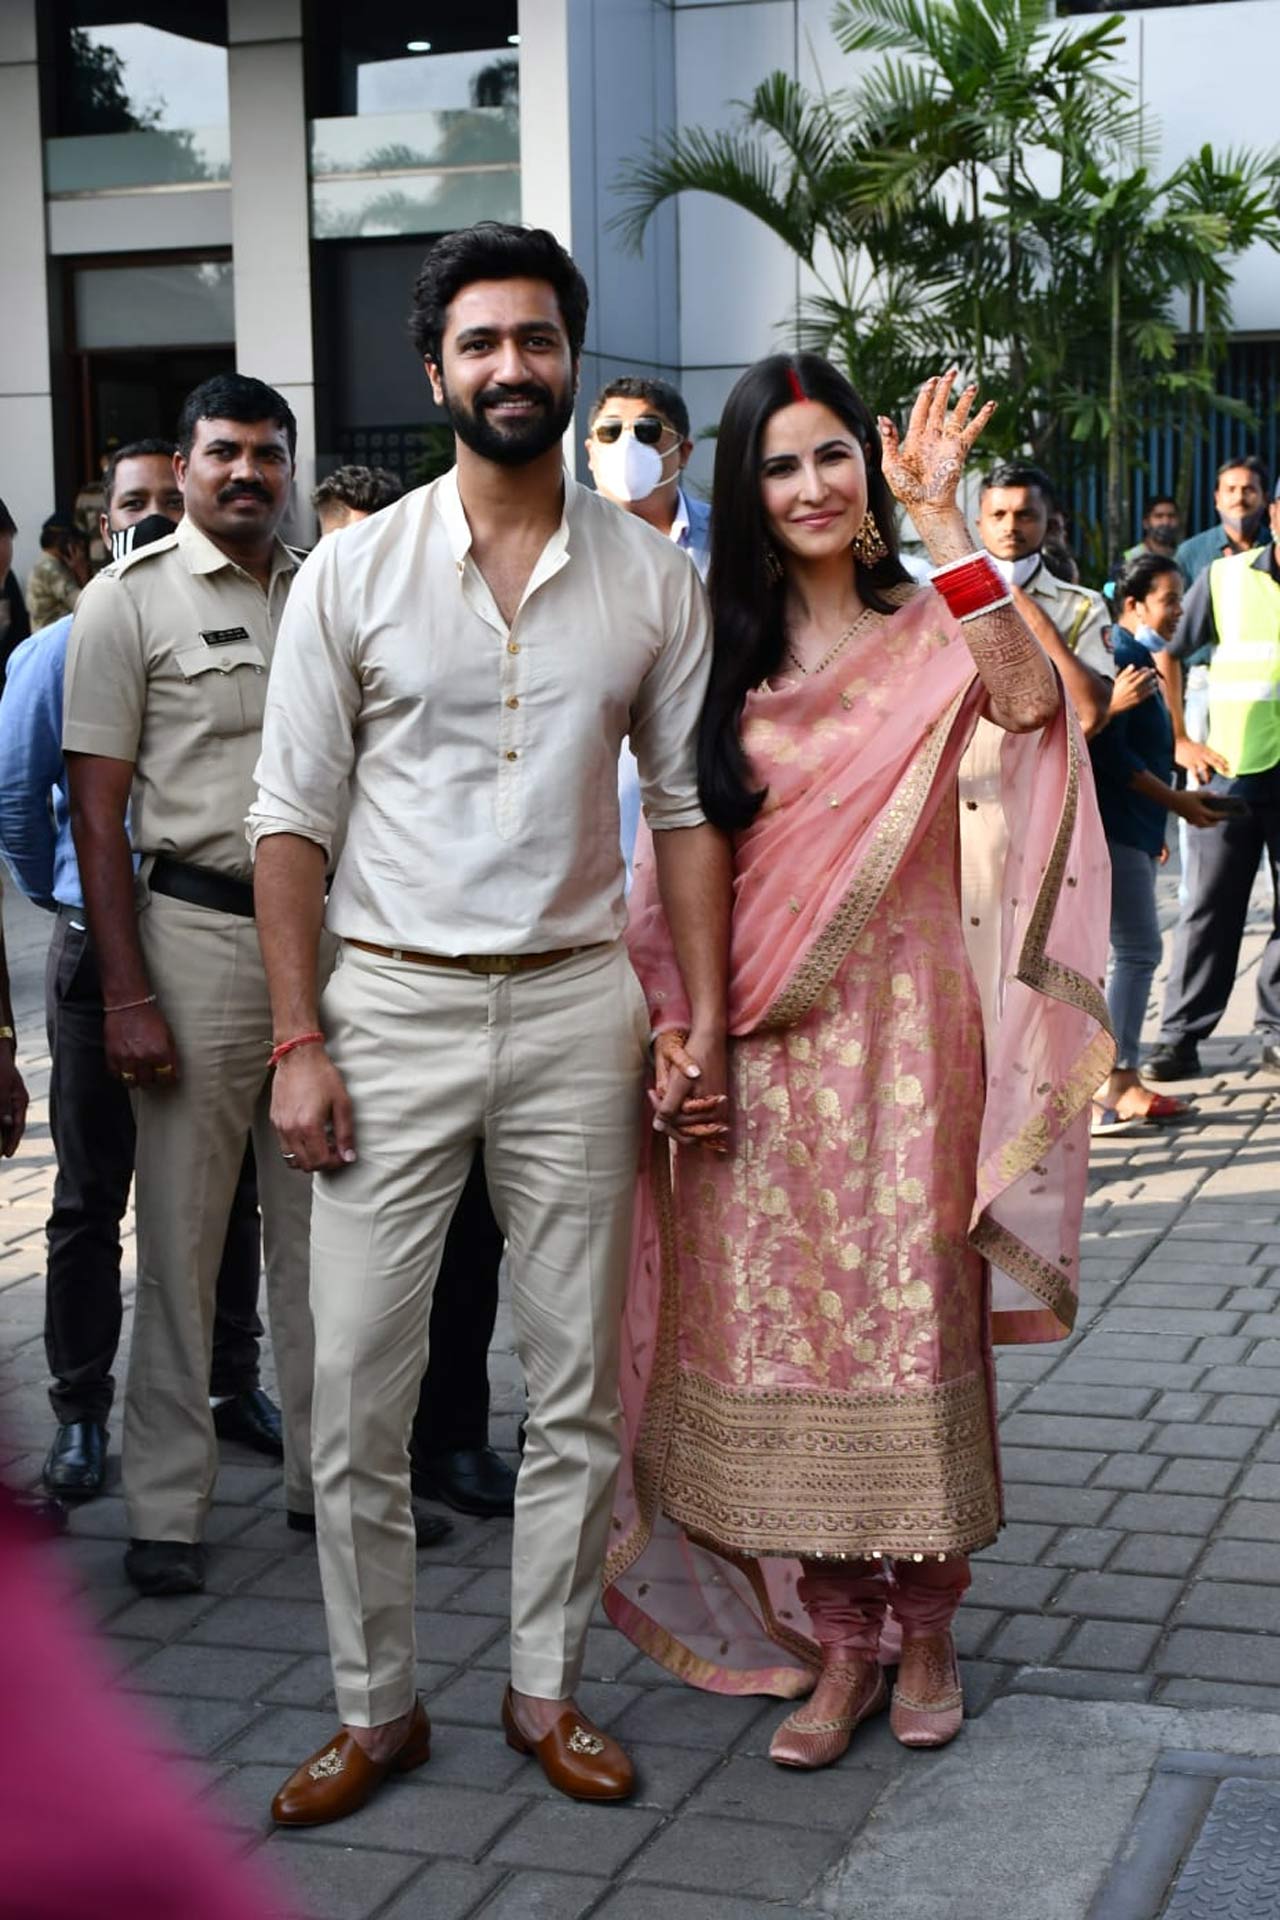 The newlyweds have returned to Mumbai after enjoying a romantic honeymoon, which reports suggest was in the Maldives. The duo had jetted off to the exotic island country after tying the knot on December 9. 